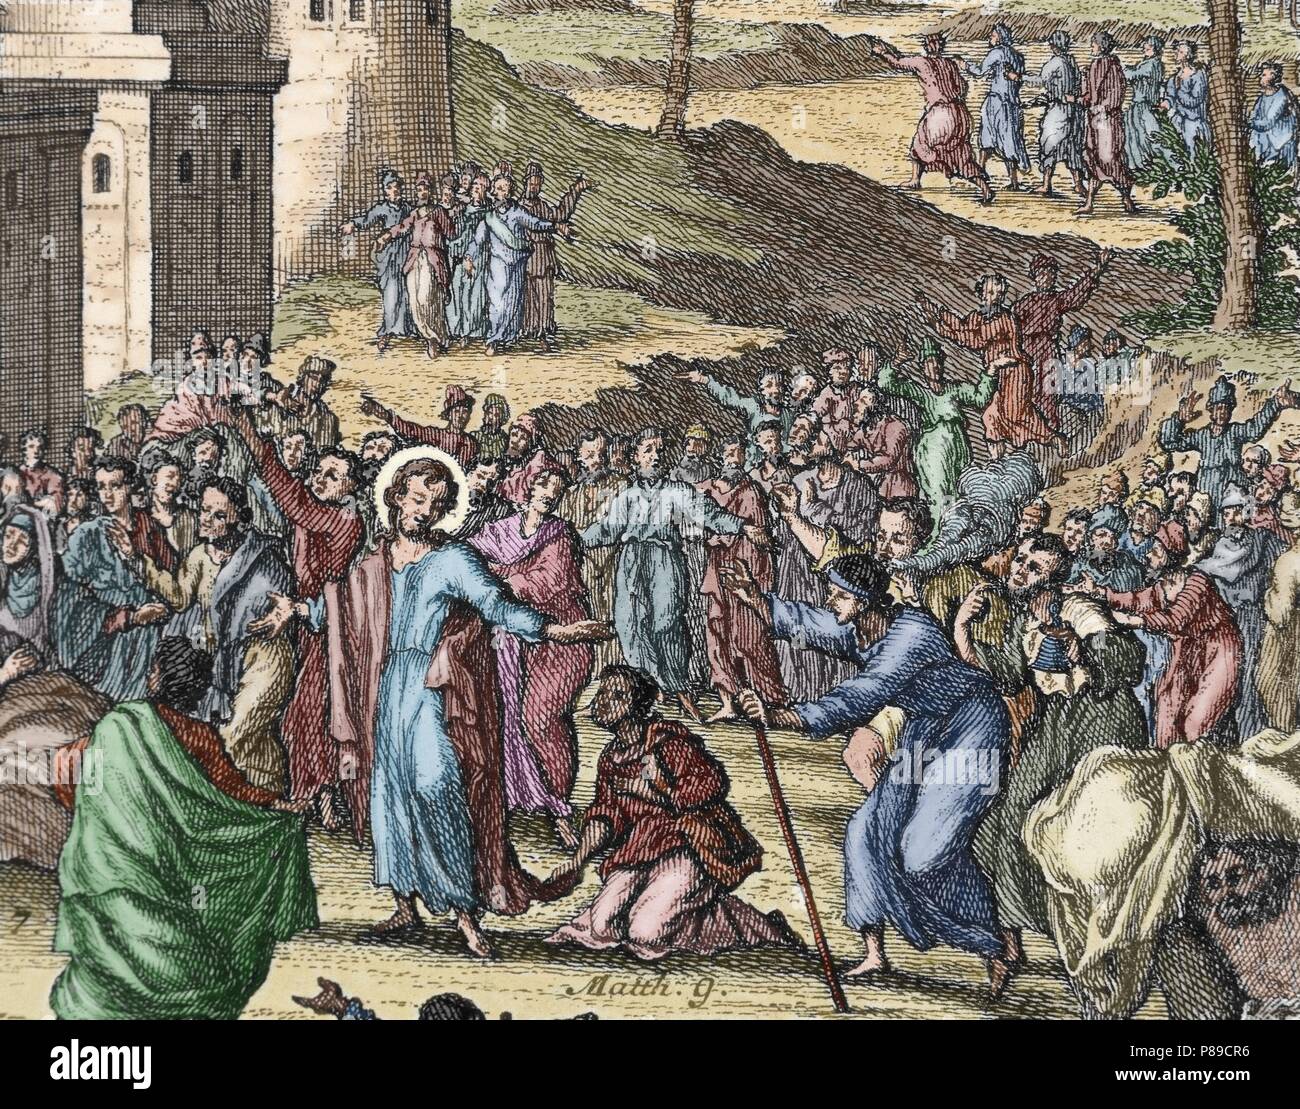 Jesus forgiving sins and healing a paralytic. Matthew, chapter 9. Engraving. Colored. Stock Photo